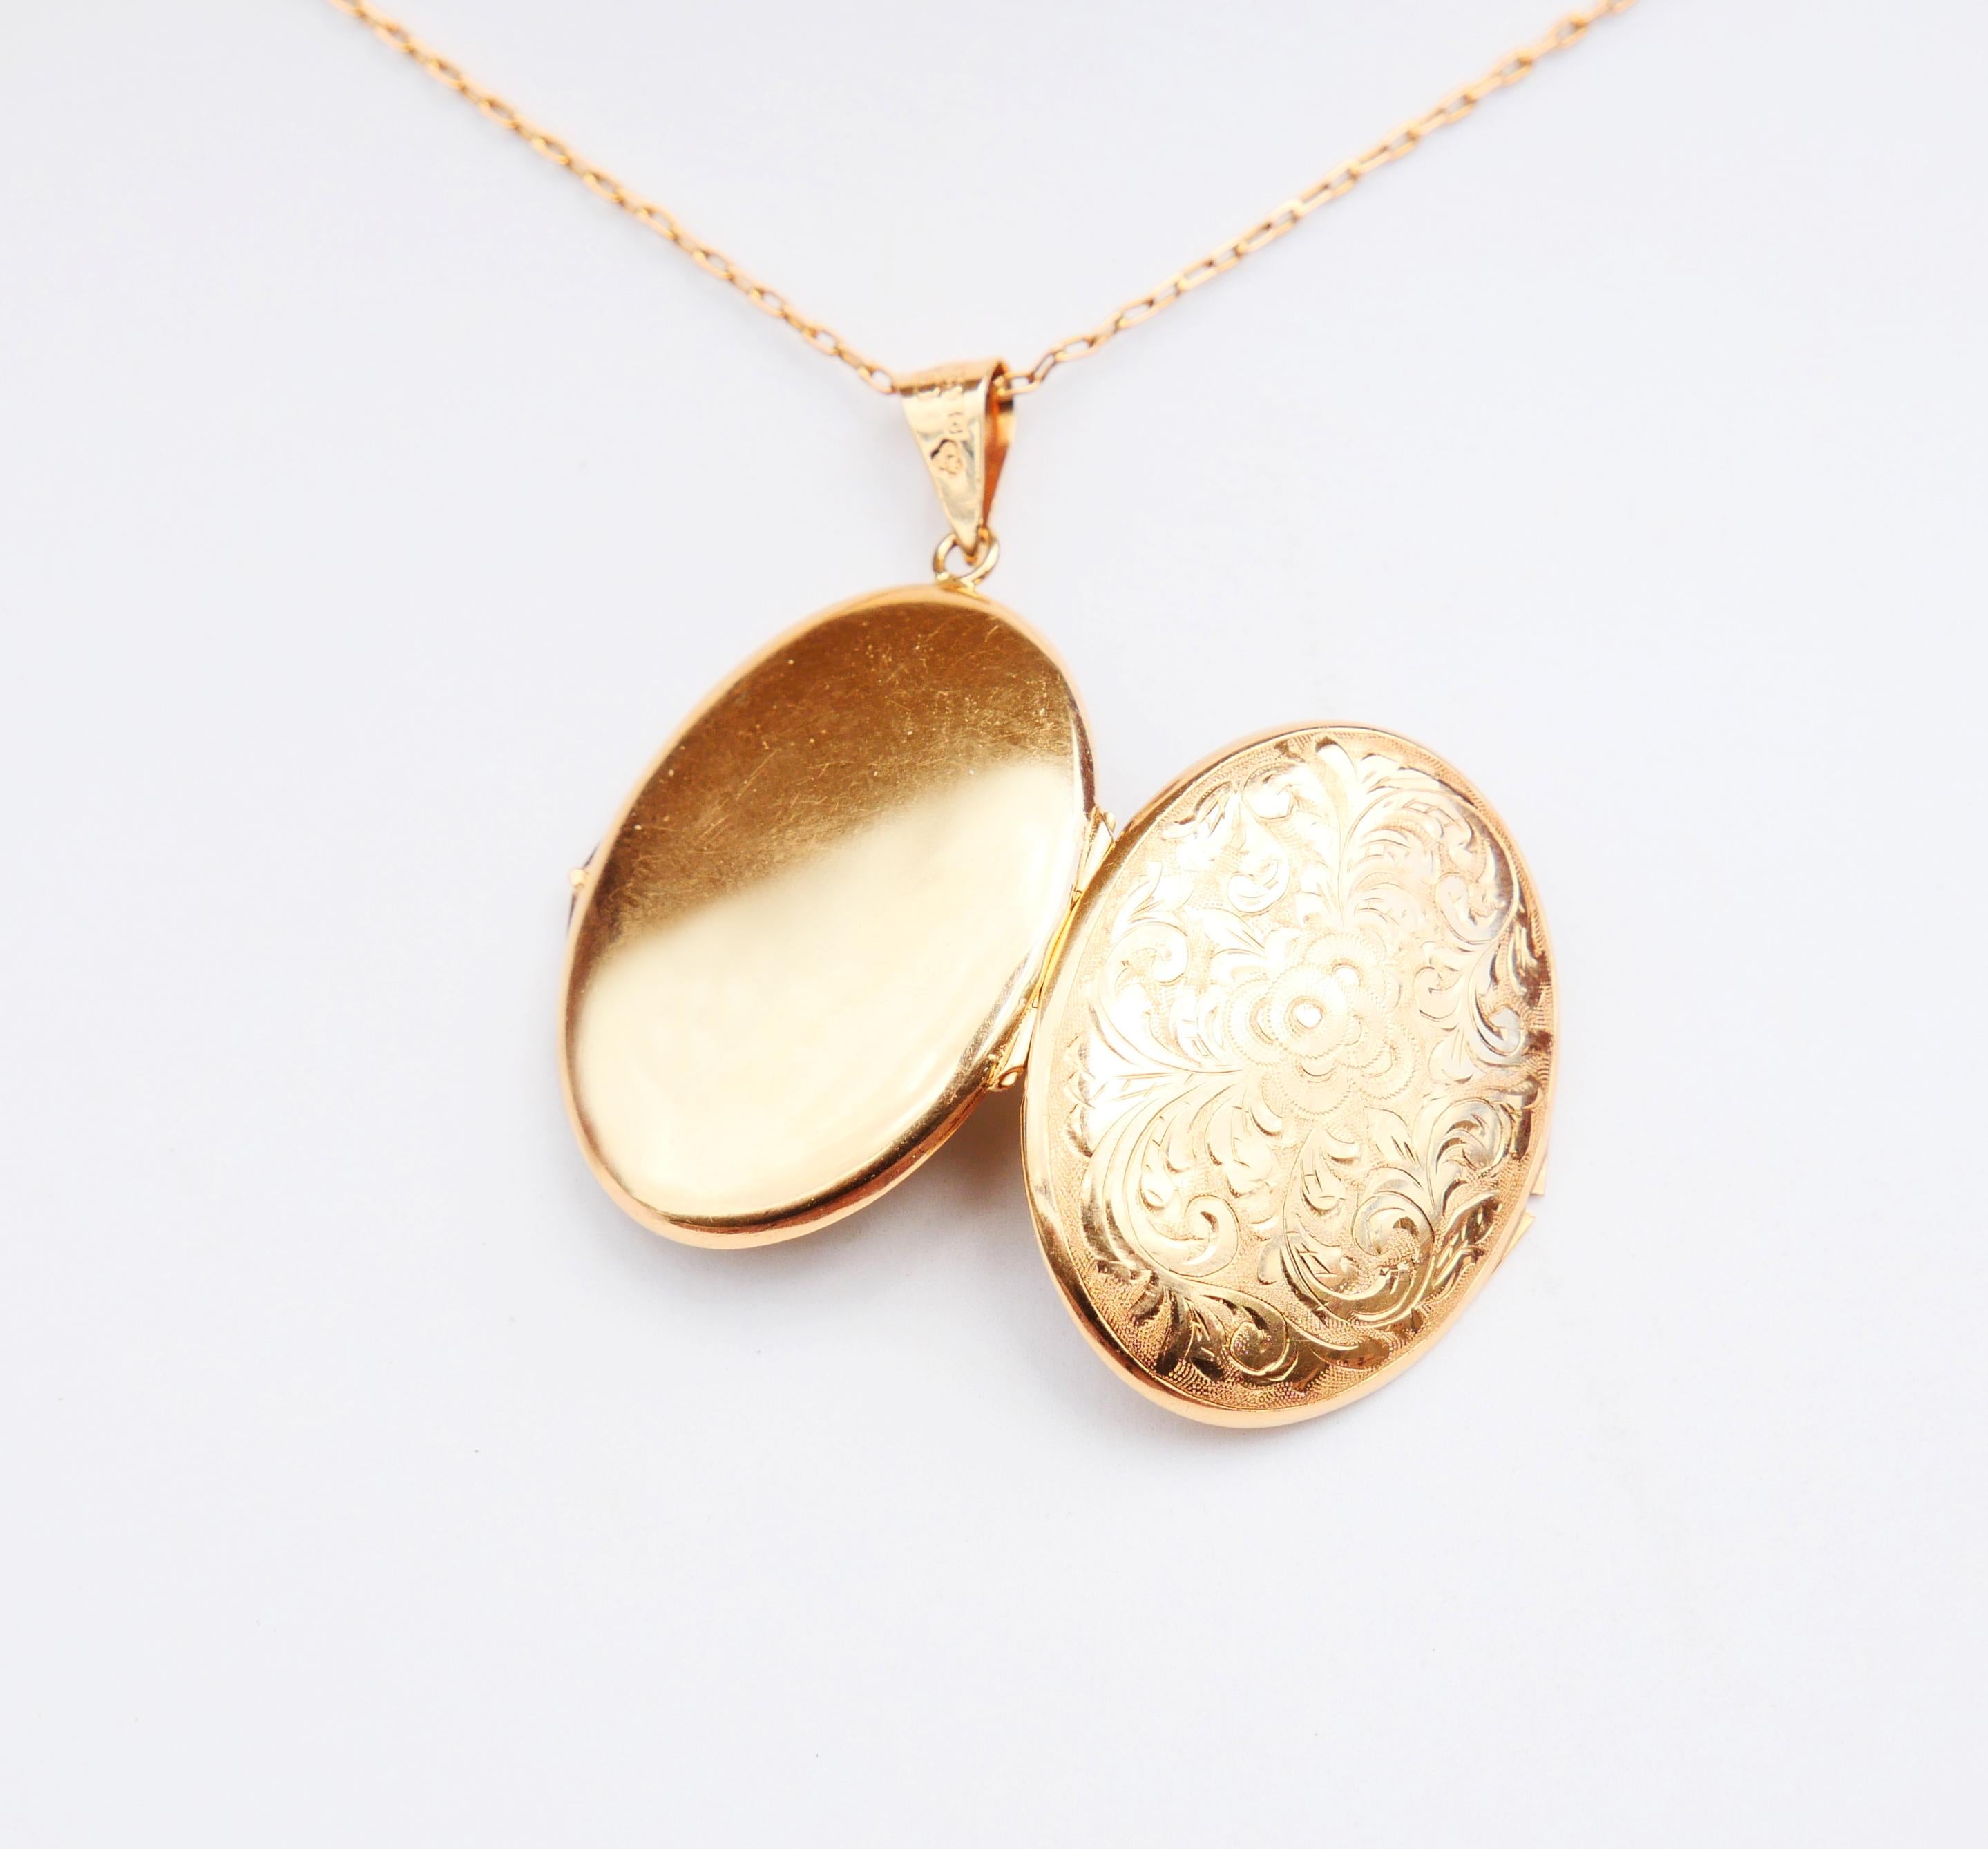 Antique oval Picture Locket Pendant solid 18K Yellow Gold / 6gr 1